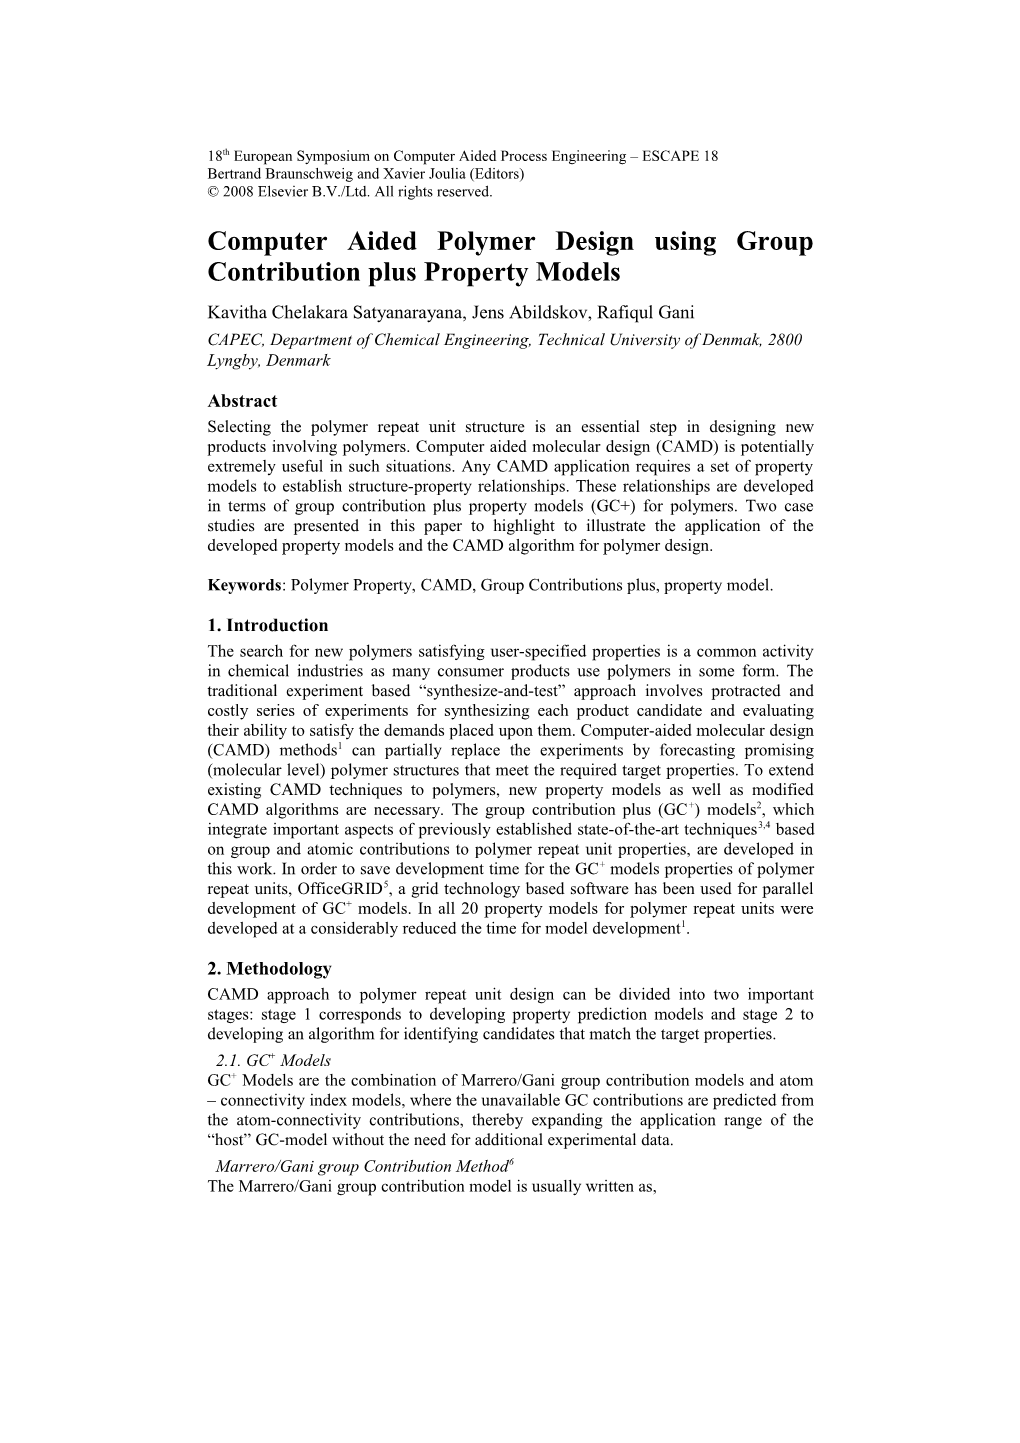 Computer Aided Polymer Design Using Group Contribution Plus Property Models